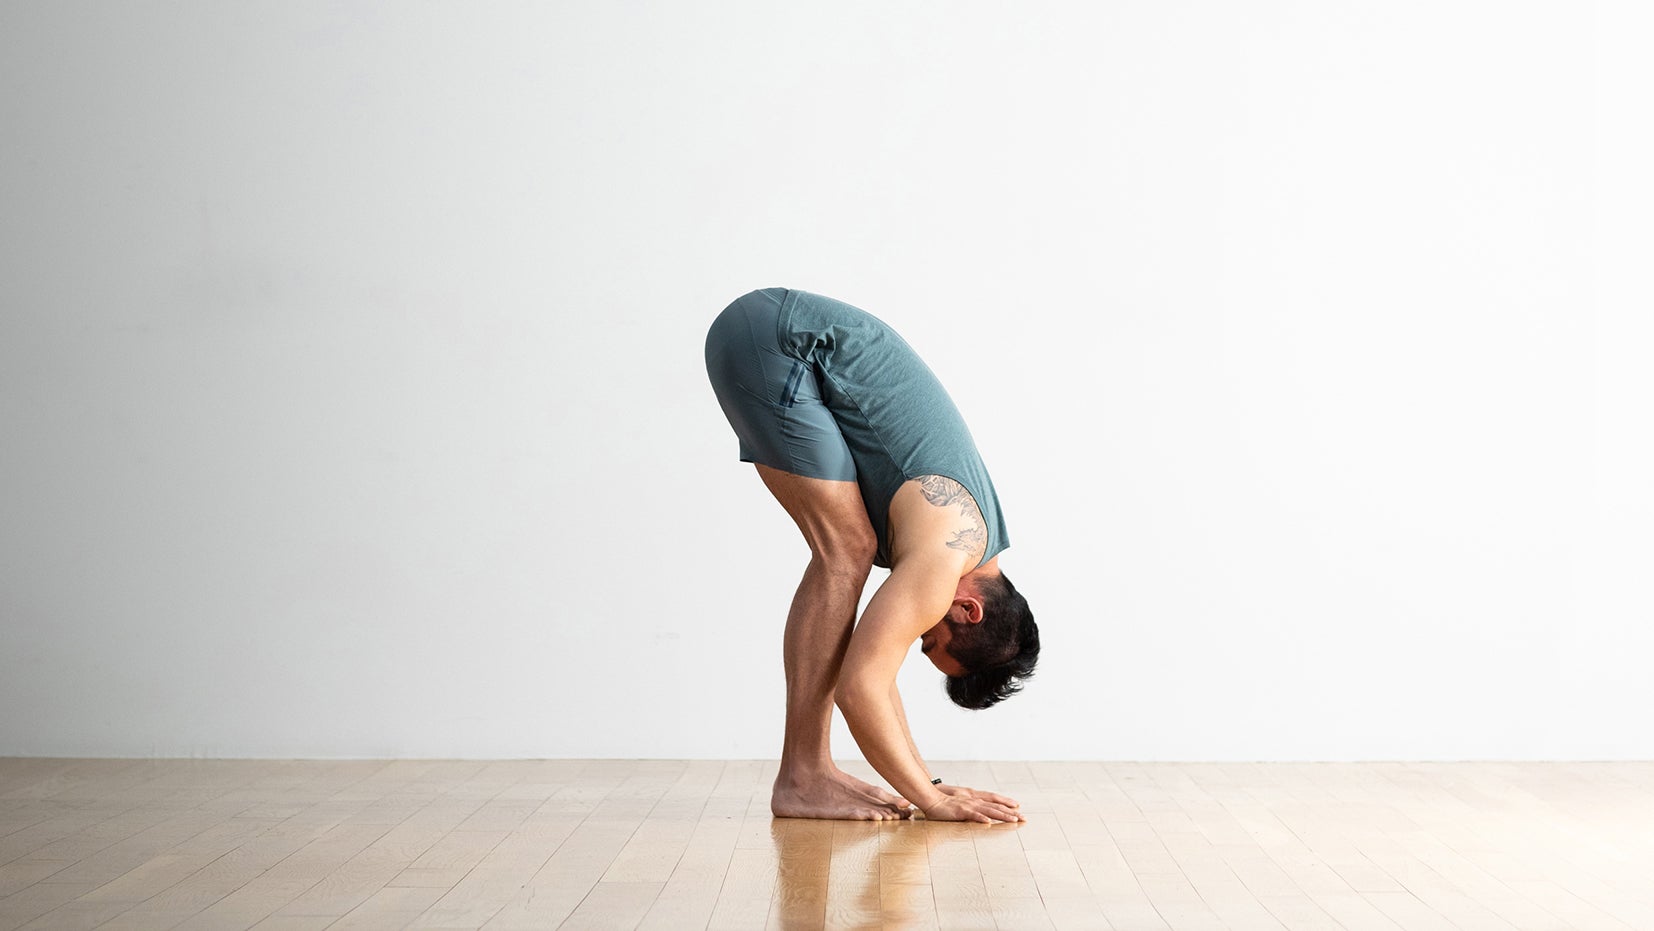 Yoga Poses For Tight Hamstrings | YouAligned.com